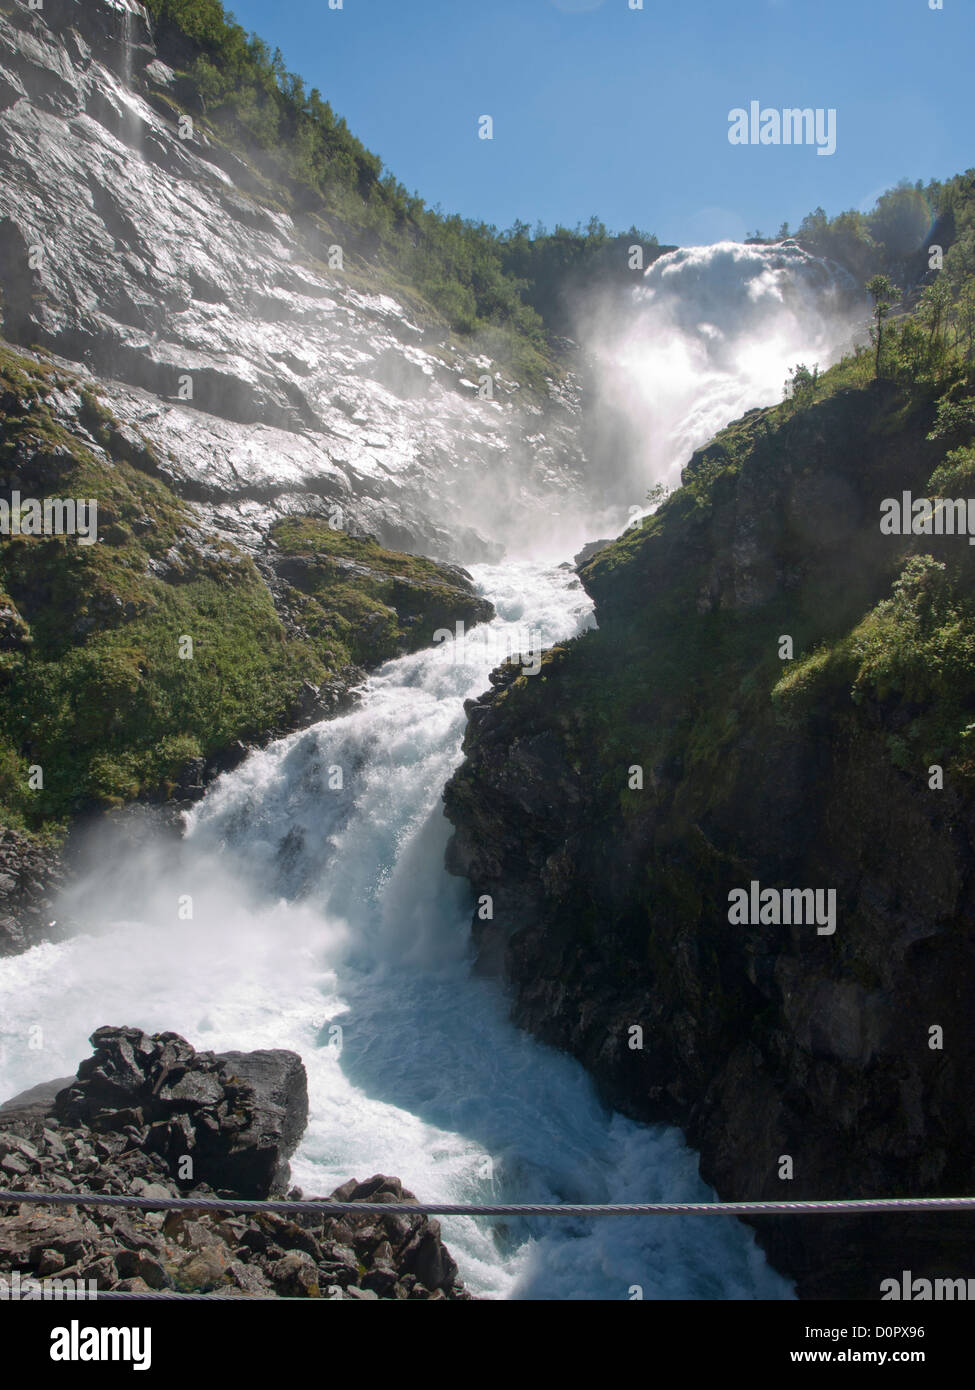 Kjosfossen Flåm valley, a waterfall and photo stop on the Flåm scenic railway line from fjord to mountains in Norway Stock Photo